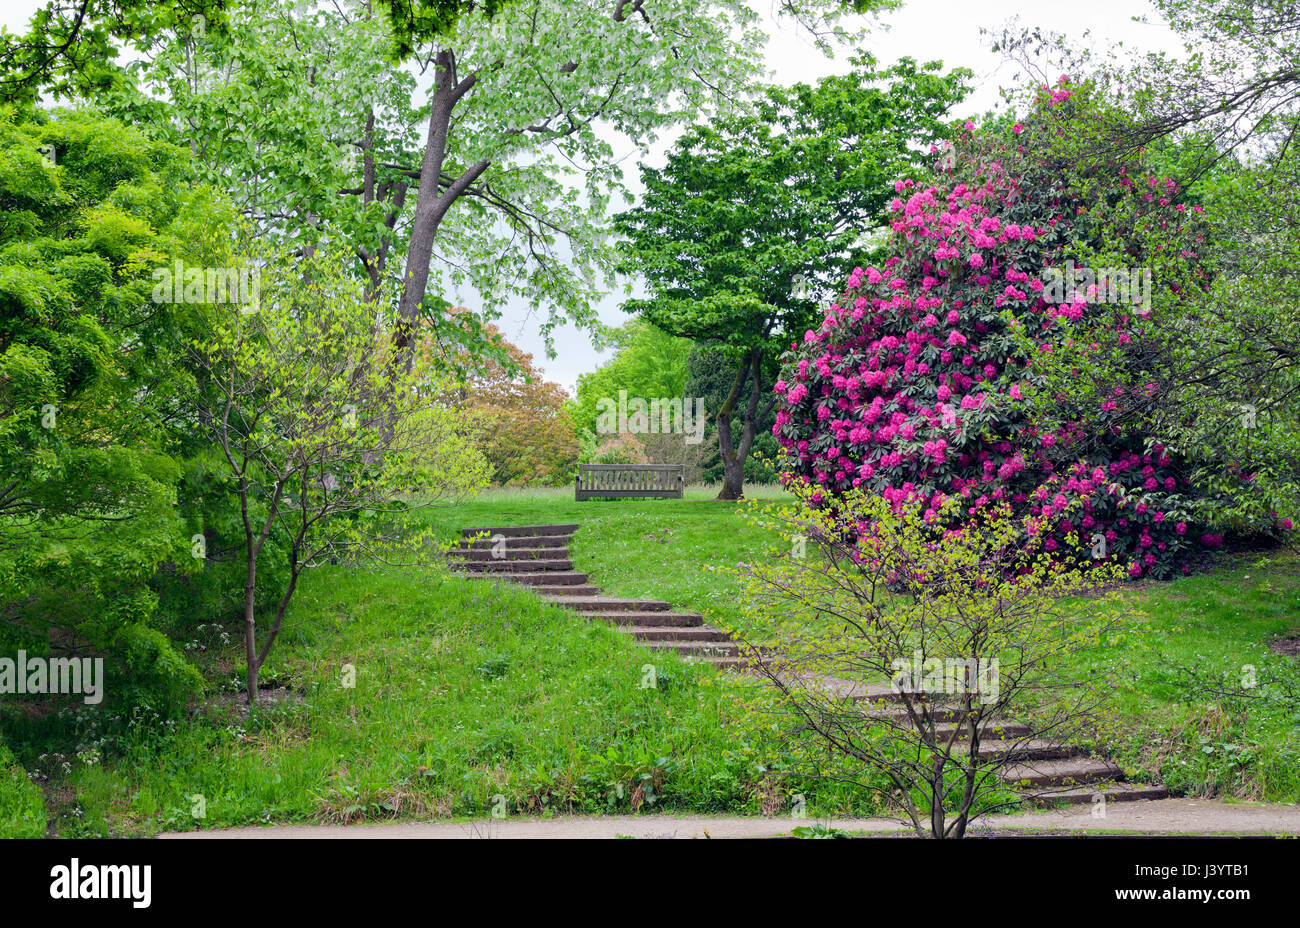 Stone stairs leading to a wooden bench surrounded by tall trees and pink rhododendron in bloom, in an english garden, spring time . Stock Photo